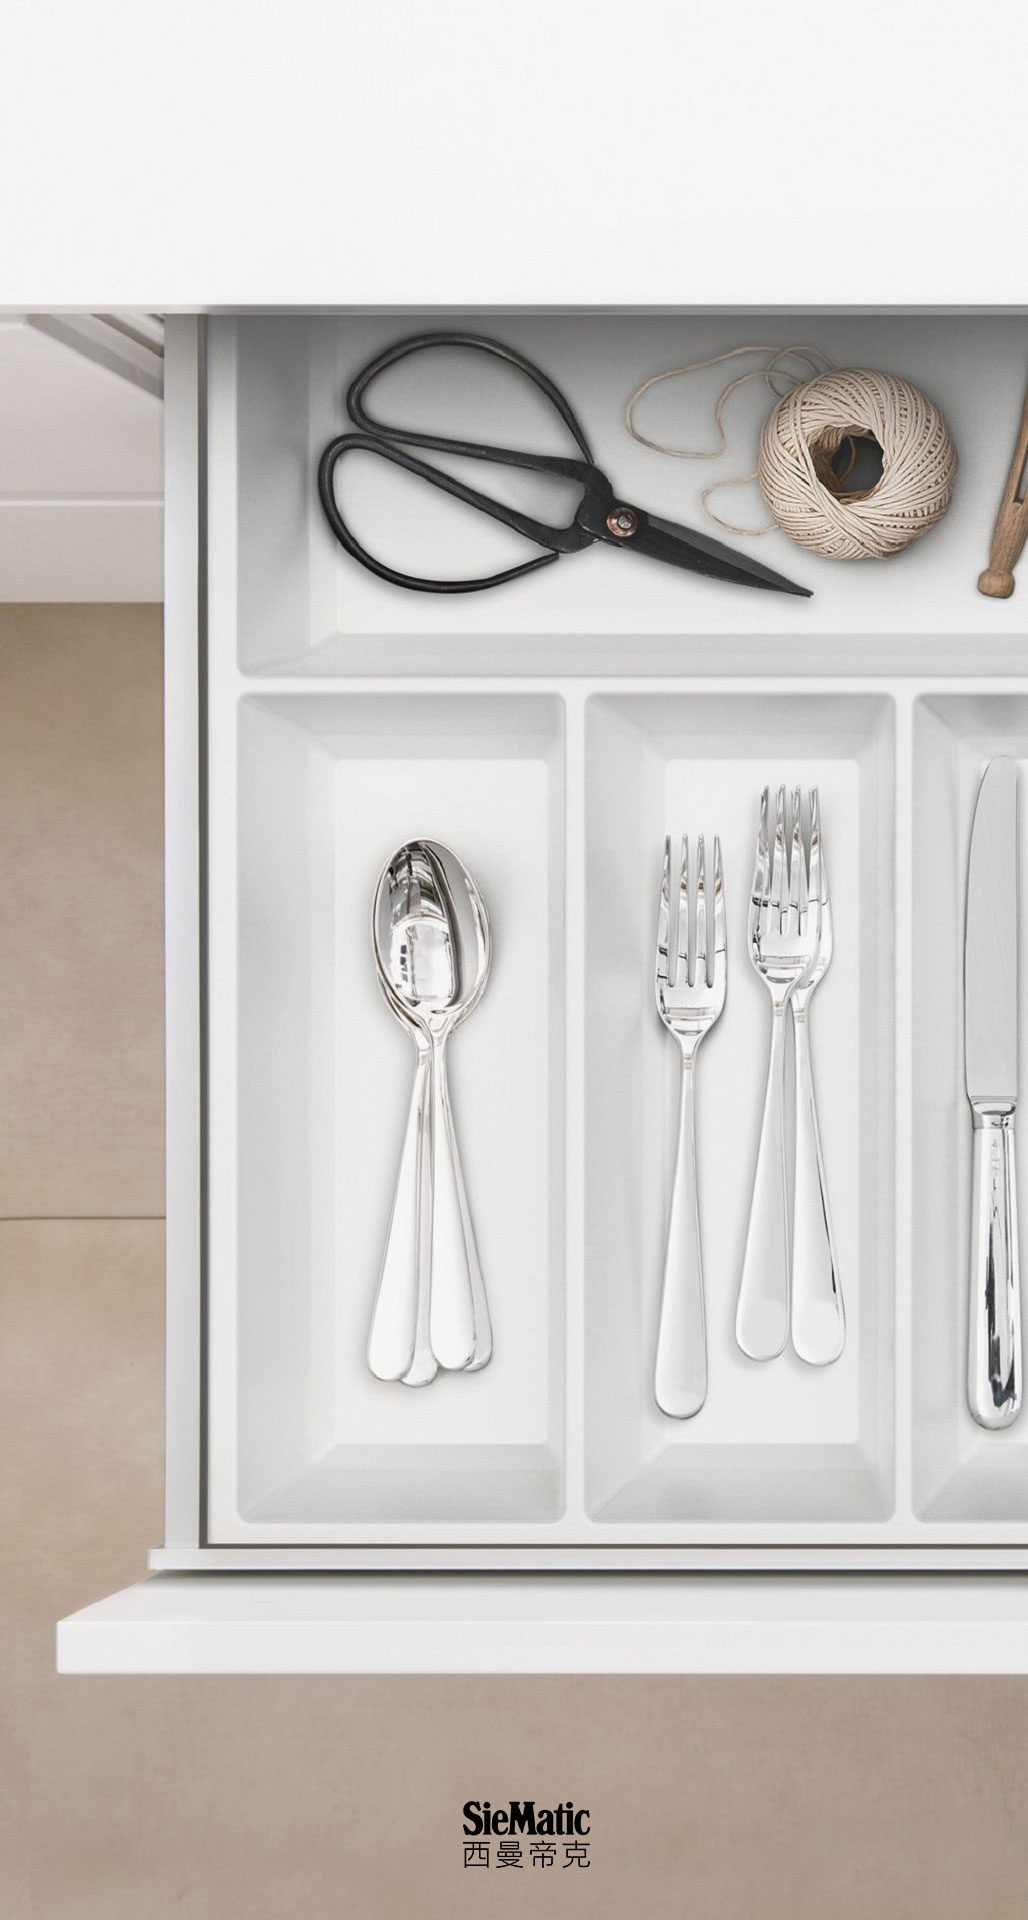 Cutlery trays from the laminate SieMatic kitchen accessories system